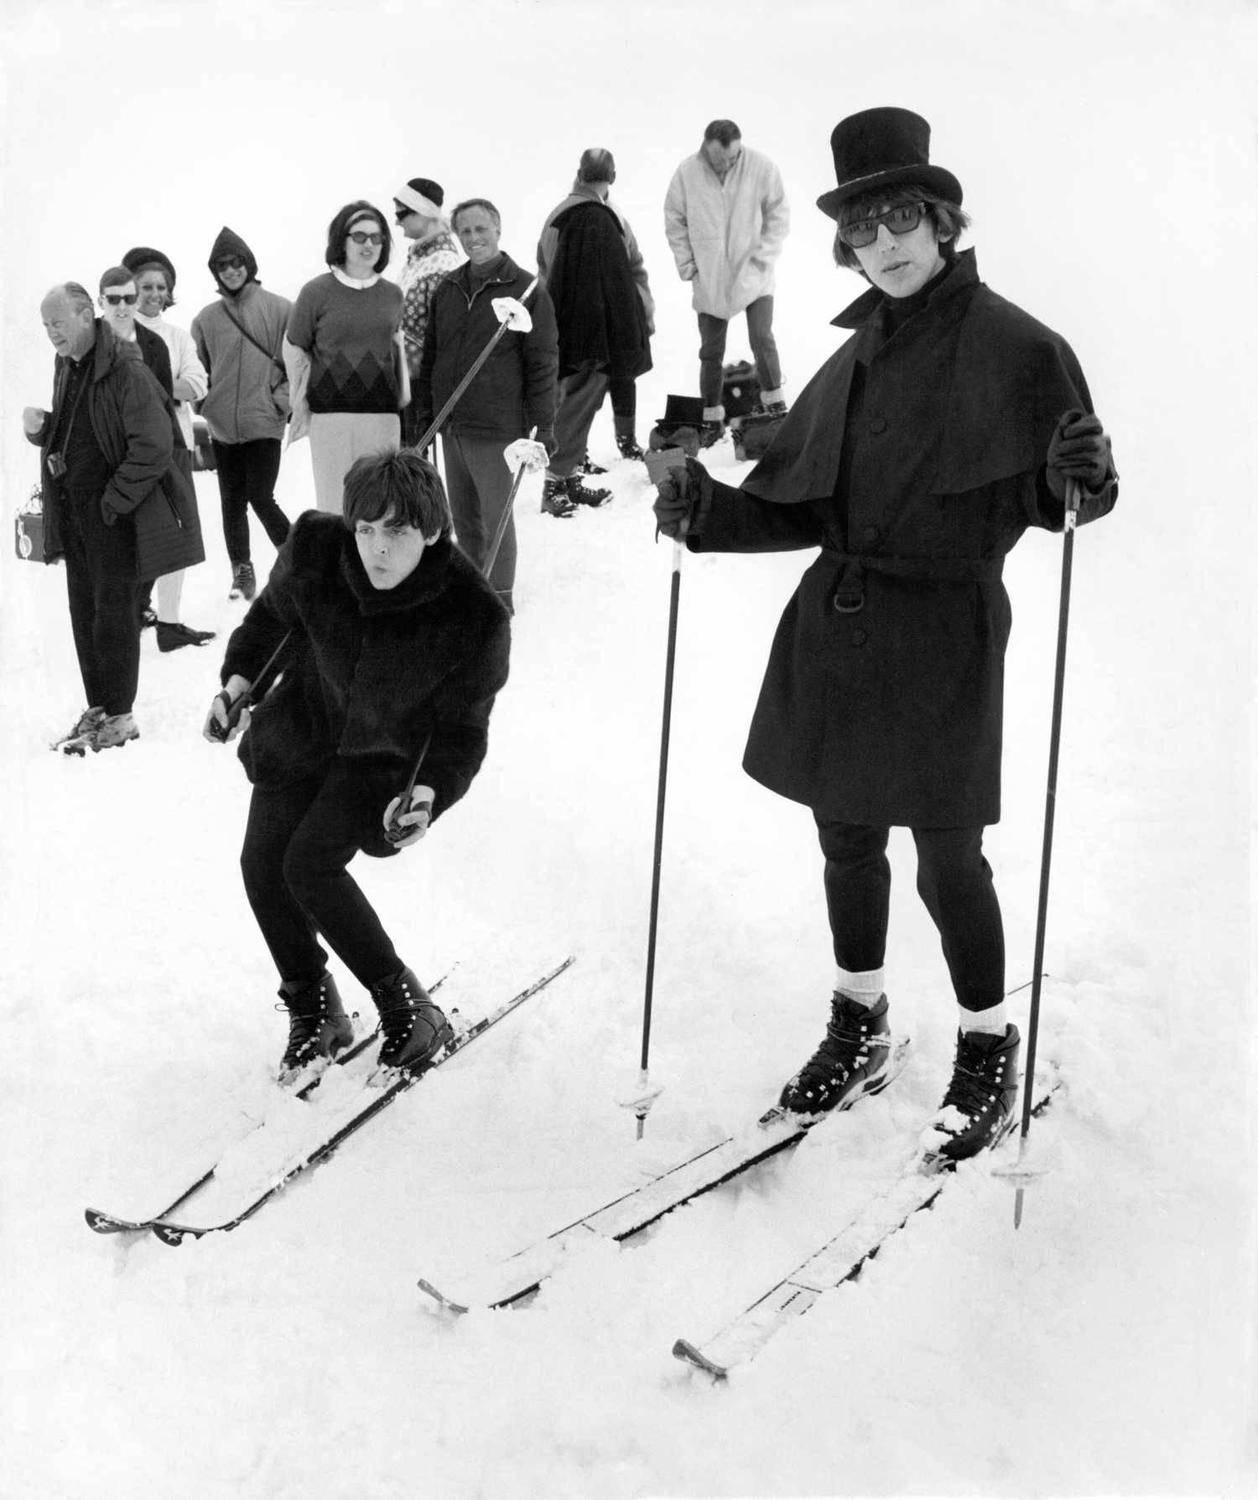 Unknown Black and White Photograph - The Beatles Skiing in 1965